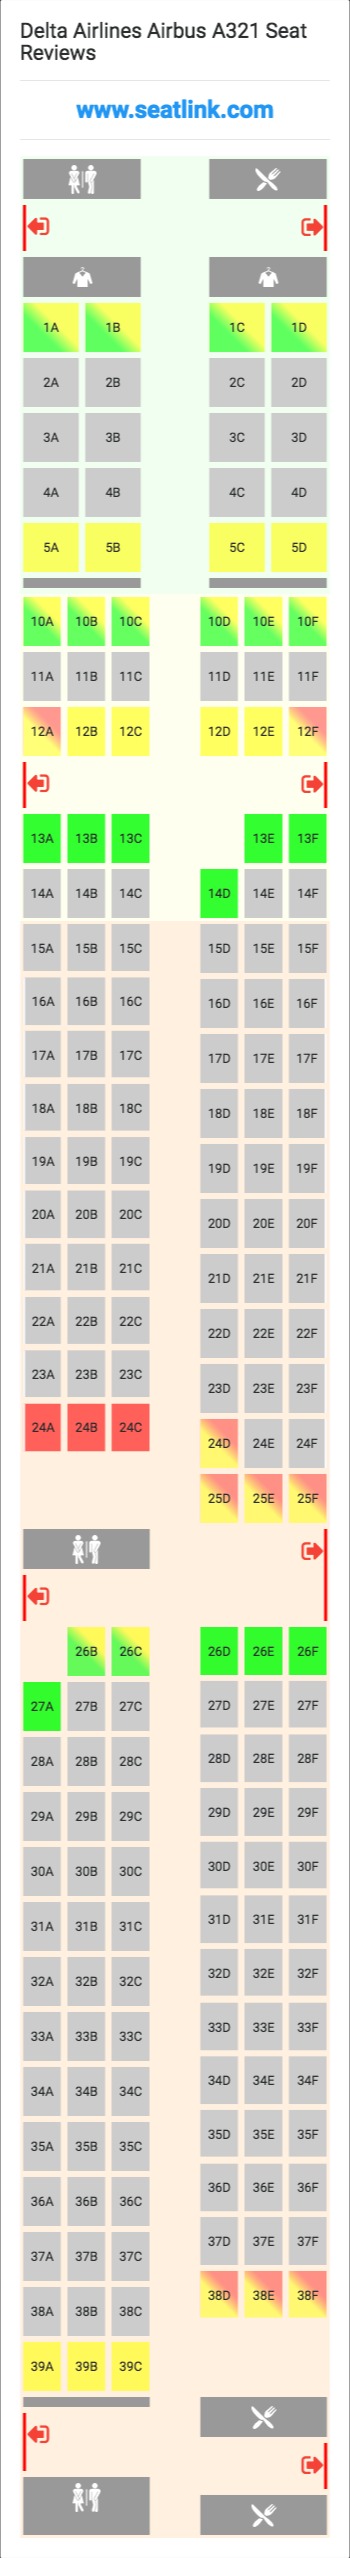 Delta Airlines Airbus A321 Seating Chart Updated August 2020